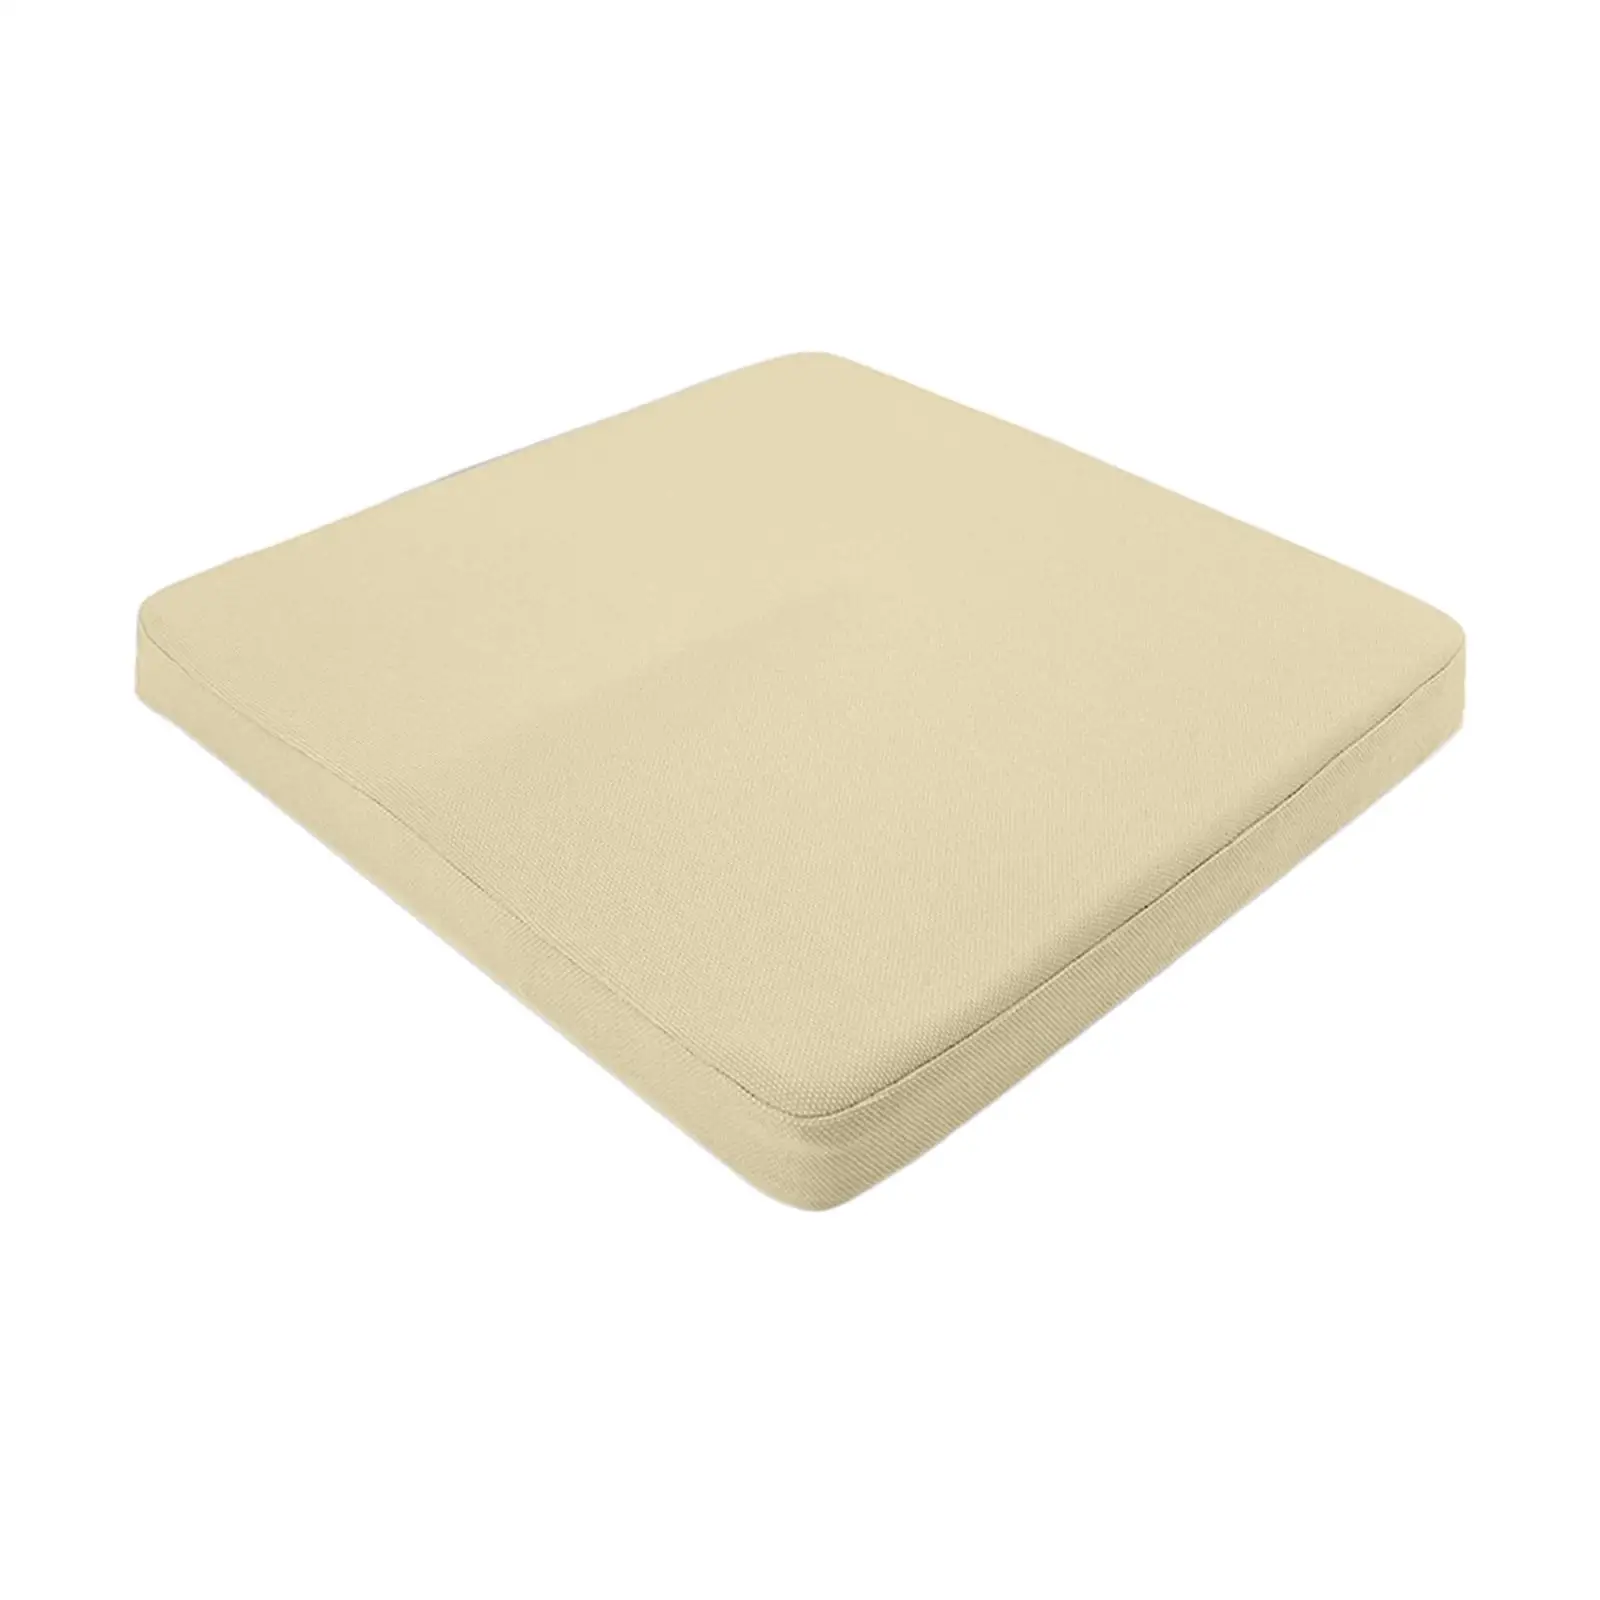 Sitting Pad Support Comfortable Portable Thicken Memory Foam Seat Cushion Soft Seat Cushion for Office Home Dining Chair